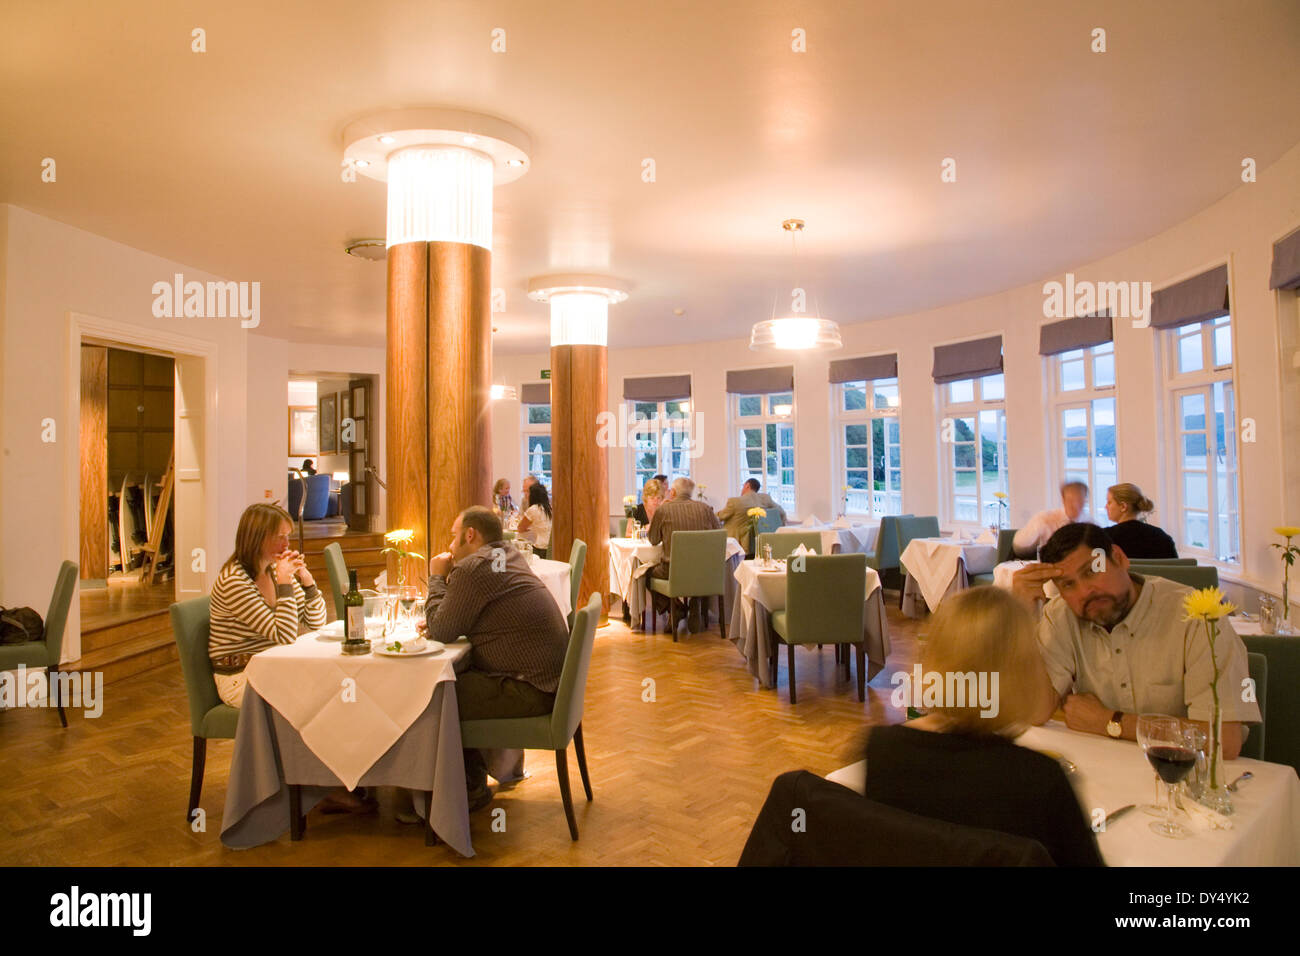 Portmeirion hotel restaurant, guests at dinner. Portmeirion, North Wales, United Kingdom Stock Photo